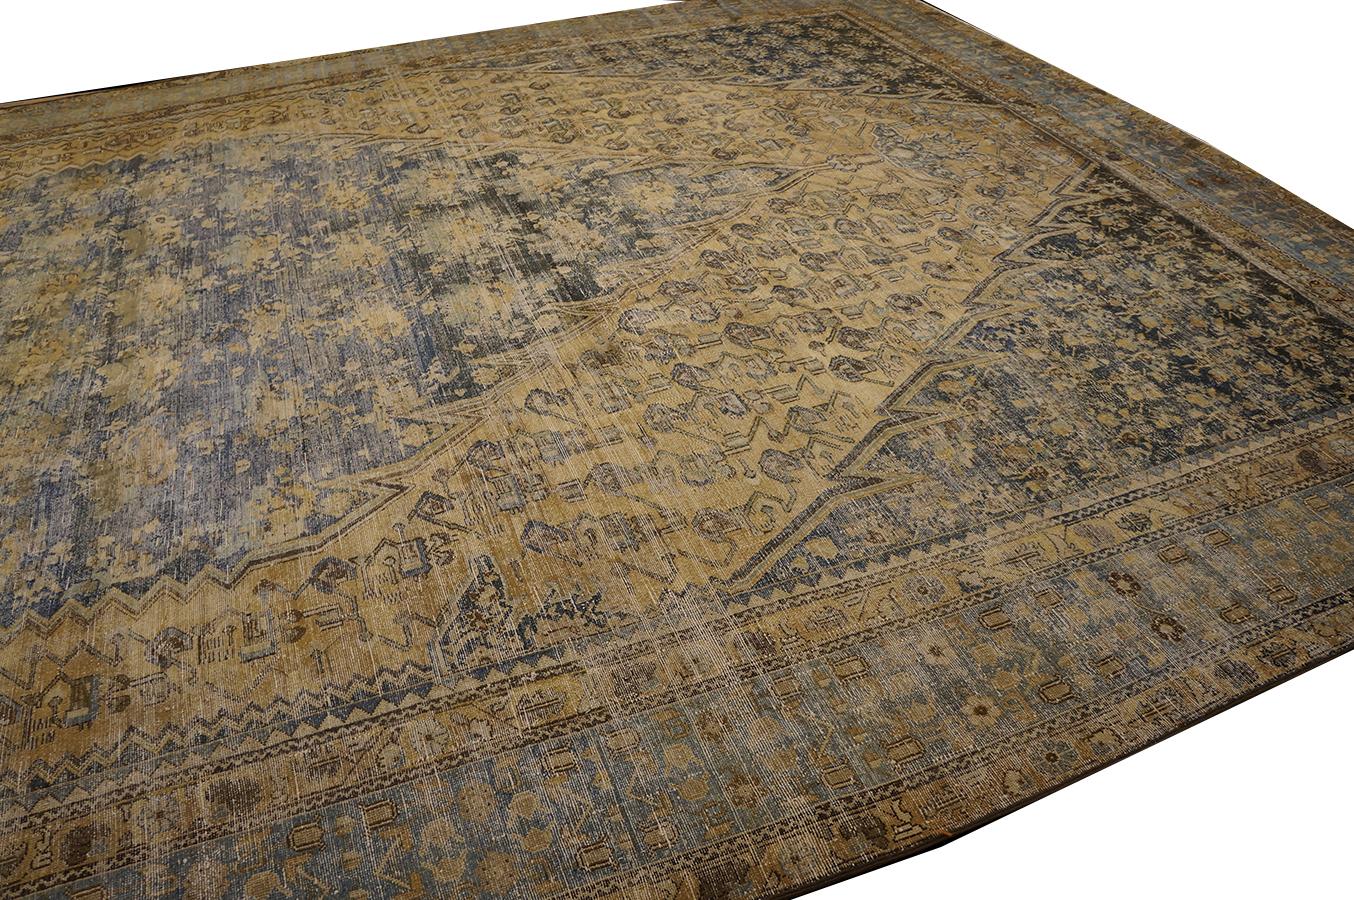 Wool Early 20th Century Persian Malayer Carpet ( 12'3'' x 21'2'' - 373 x 645 ) For Sale